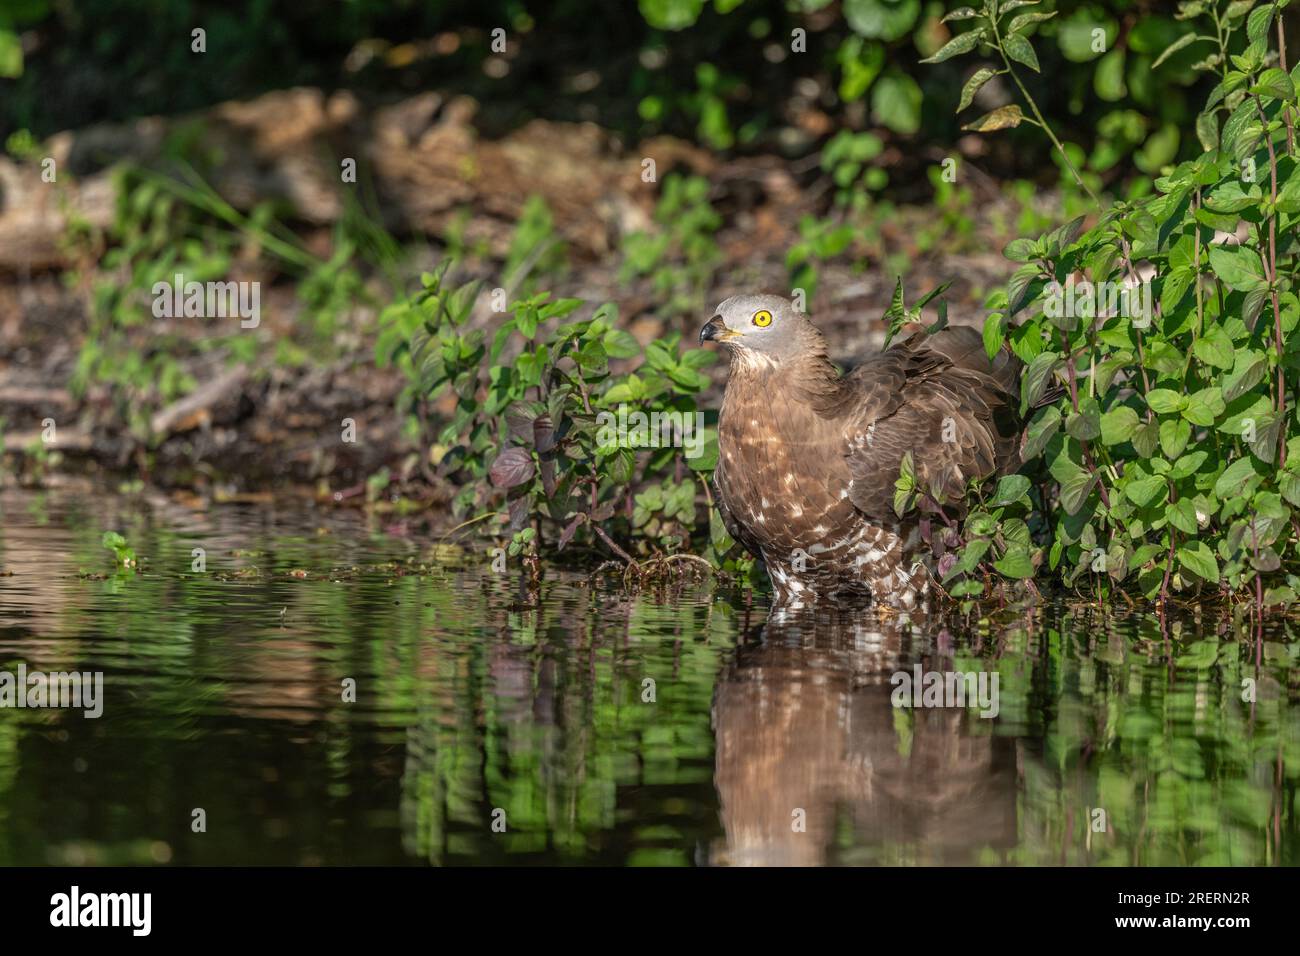 European Honey Buzzard (Pernis apivorus) coming to drink in a pond during a heat wave. Bas-Rhin, Collectivite europeenne d'Alsace,Grand Est, France. Stock Photo